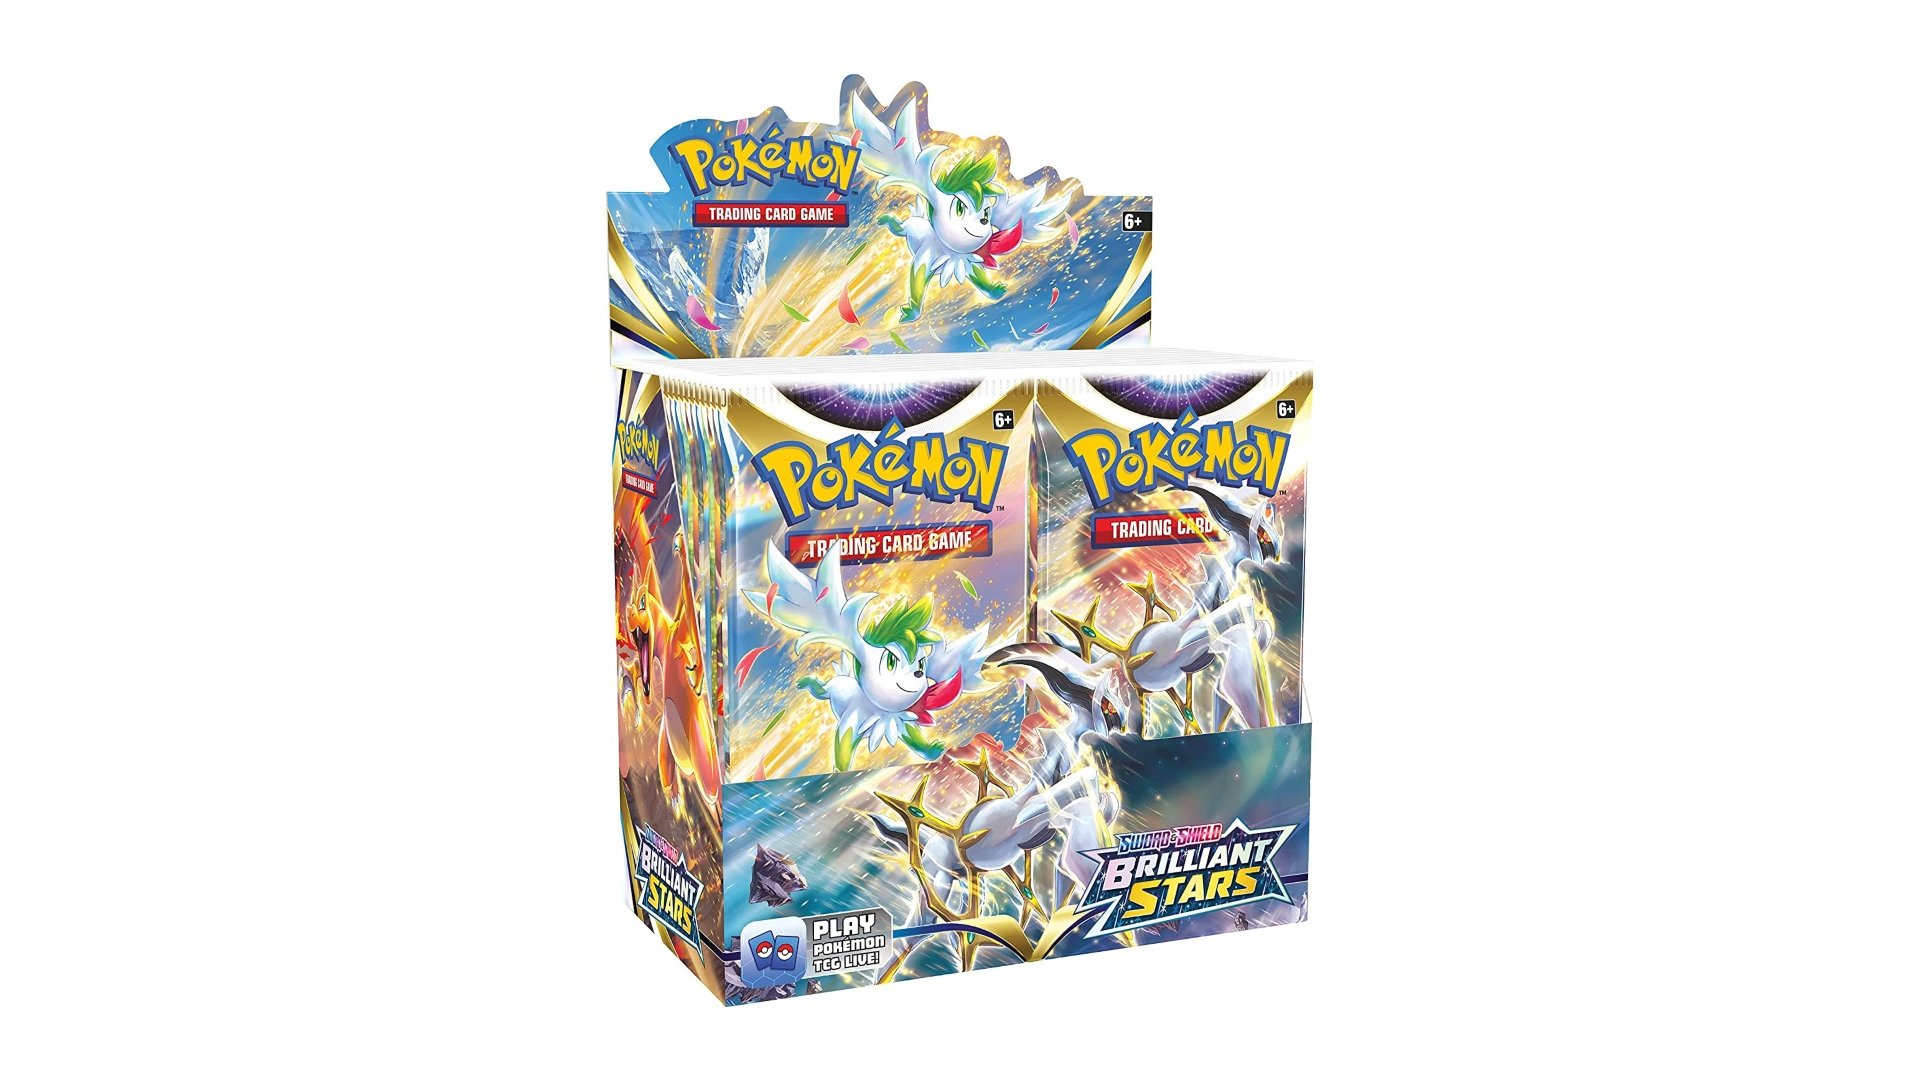 The best Pokémon booster boxes - a box of Sword & Shield Brilliant Stars Pokemon cards